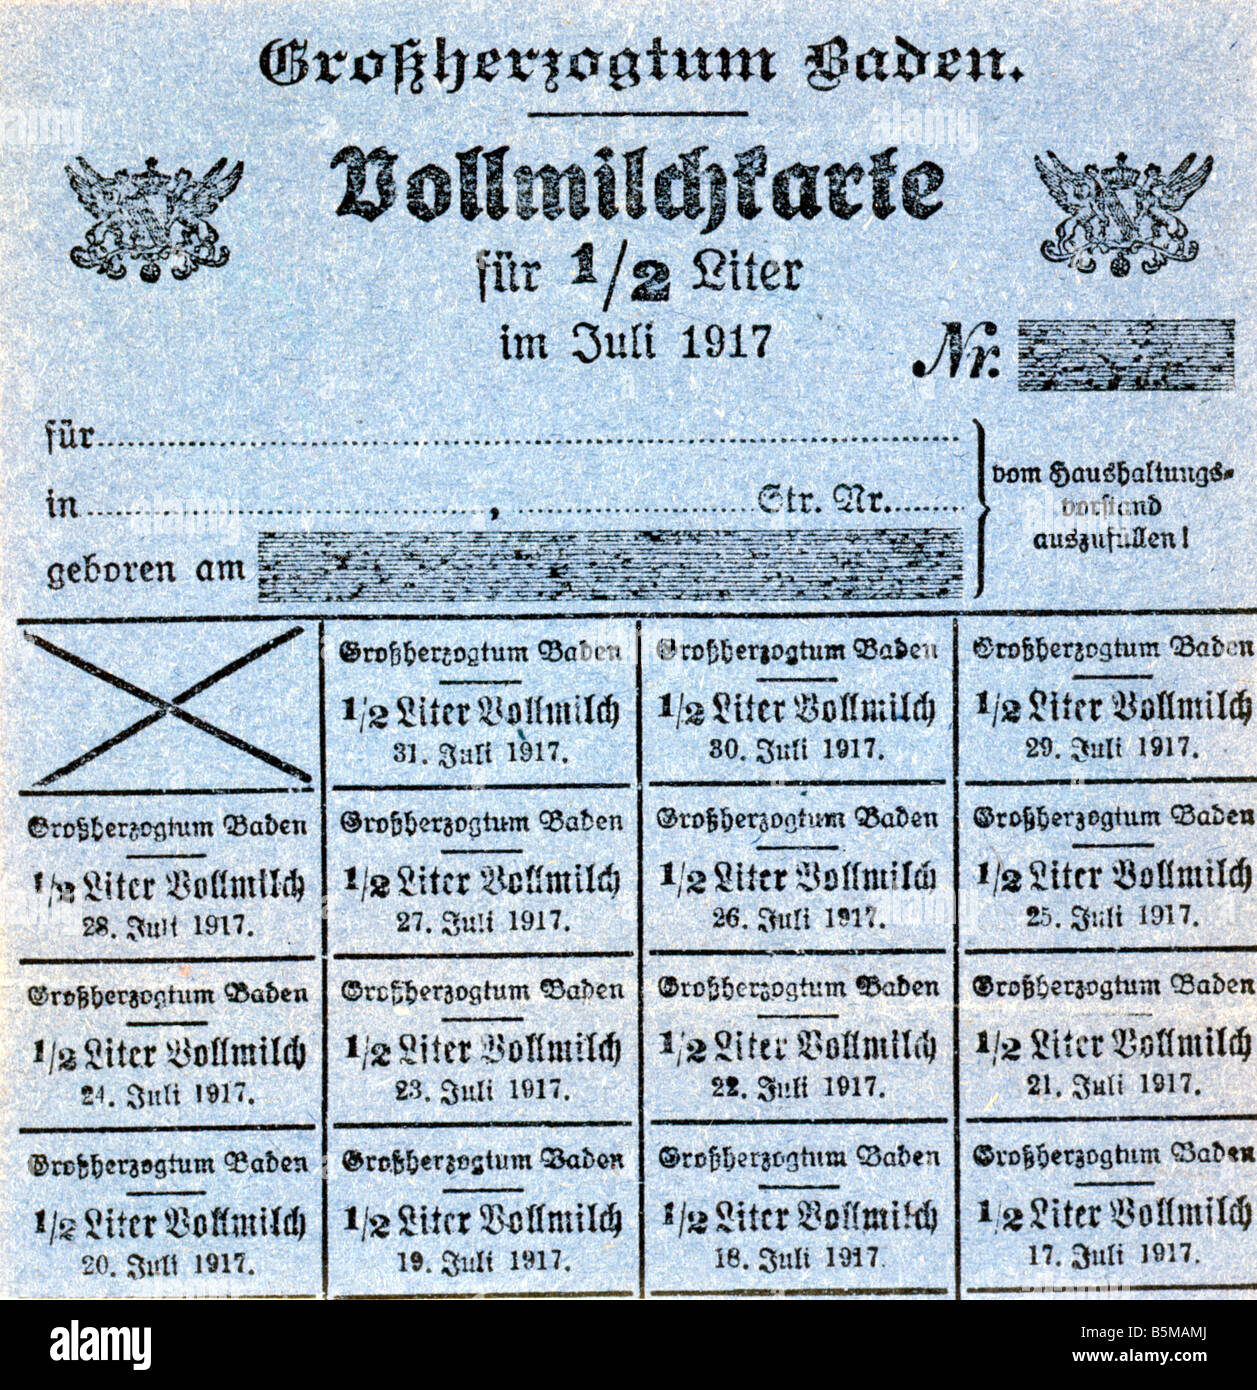 2 G75 L1 1917 8 E Food Ration Cards Milk WWI Germany History Germany Food rationing during World War I 1914 18 Series of food ra Stock Photo